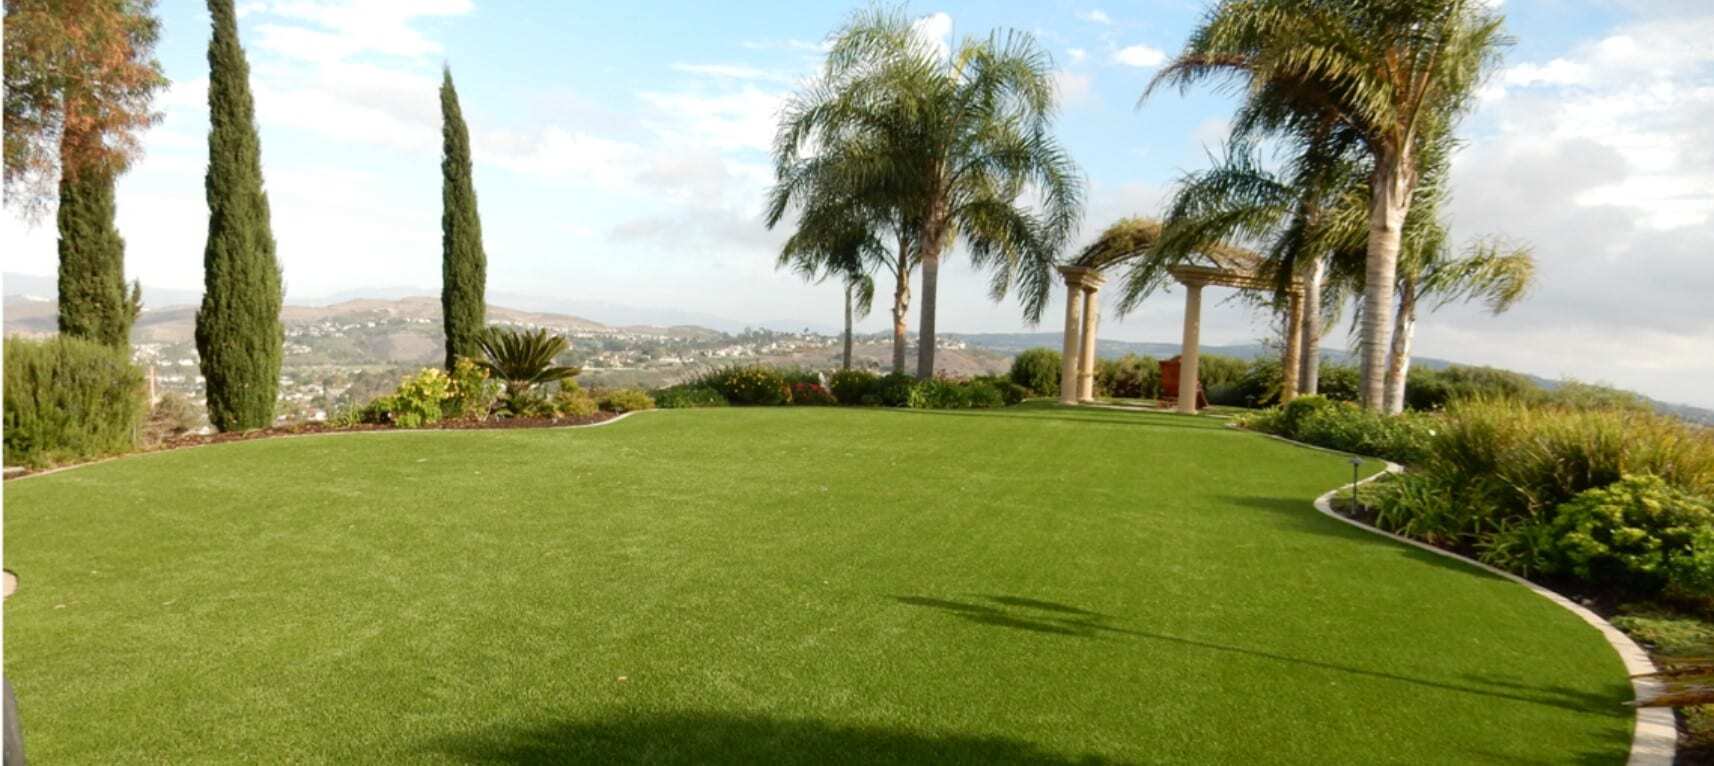 Residential Turf Landscapes, The Ultimate Landscape, Beaumont, CA